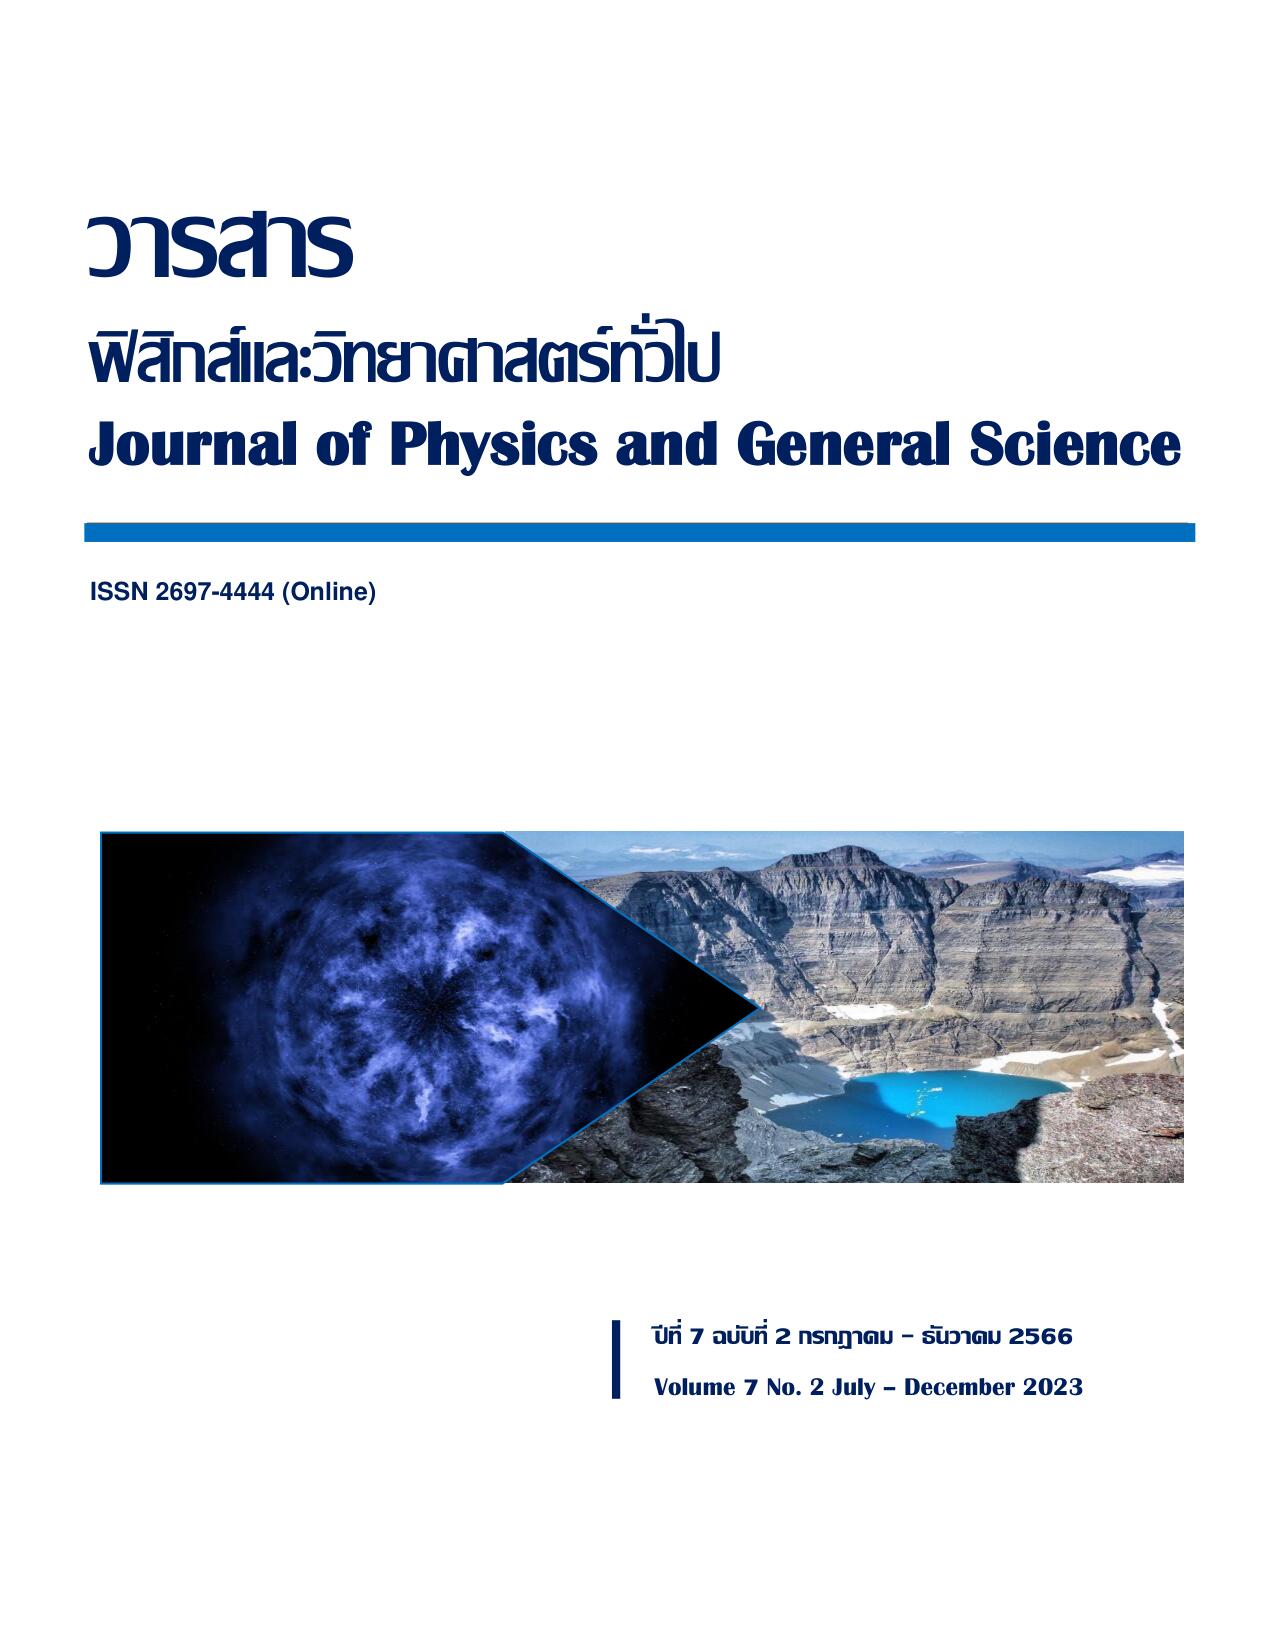 Journal of Physics and General Science